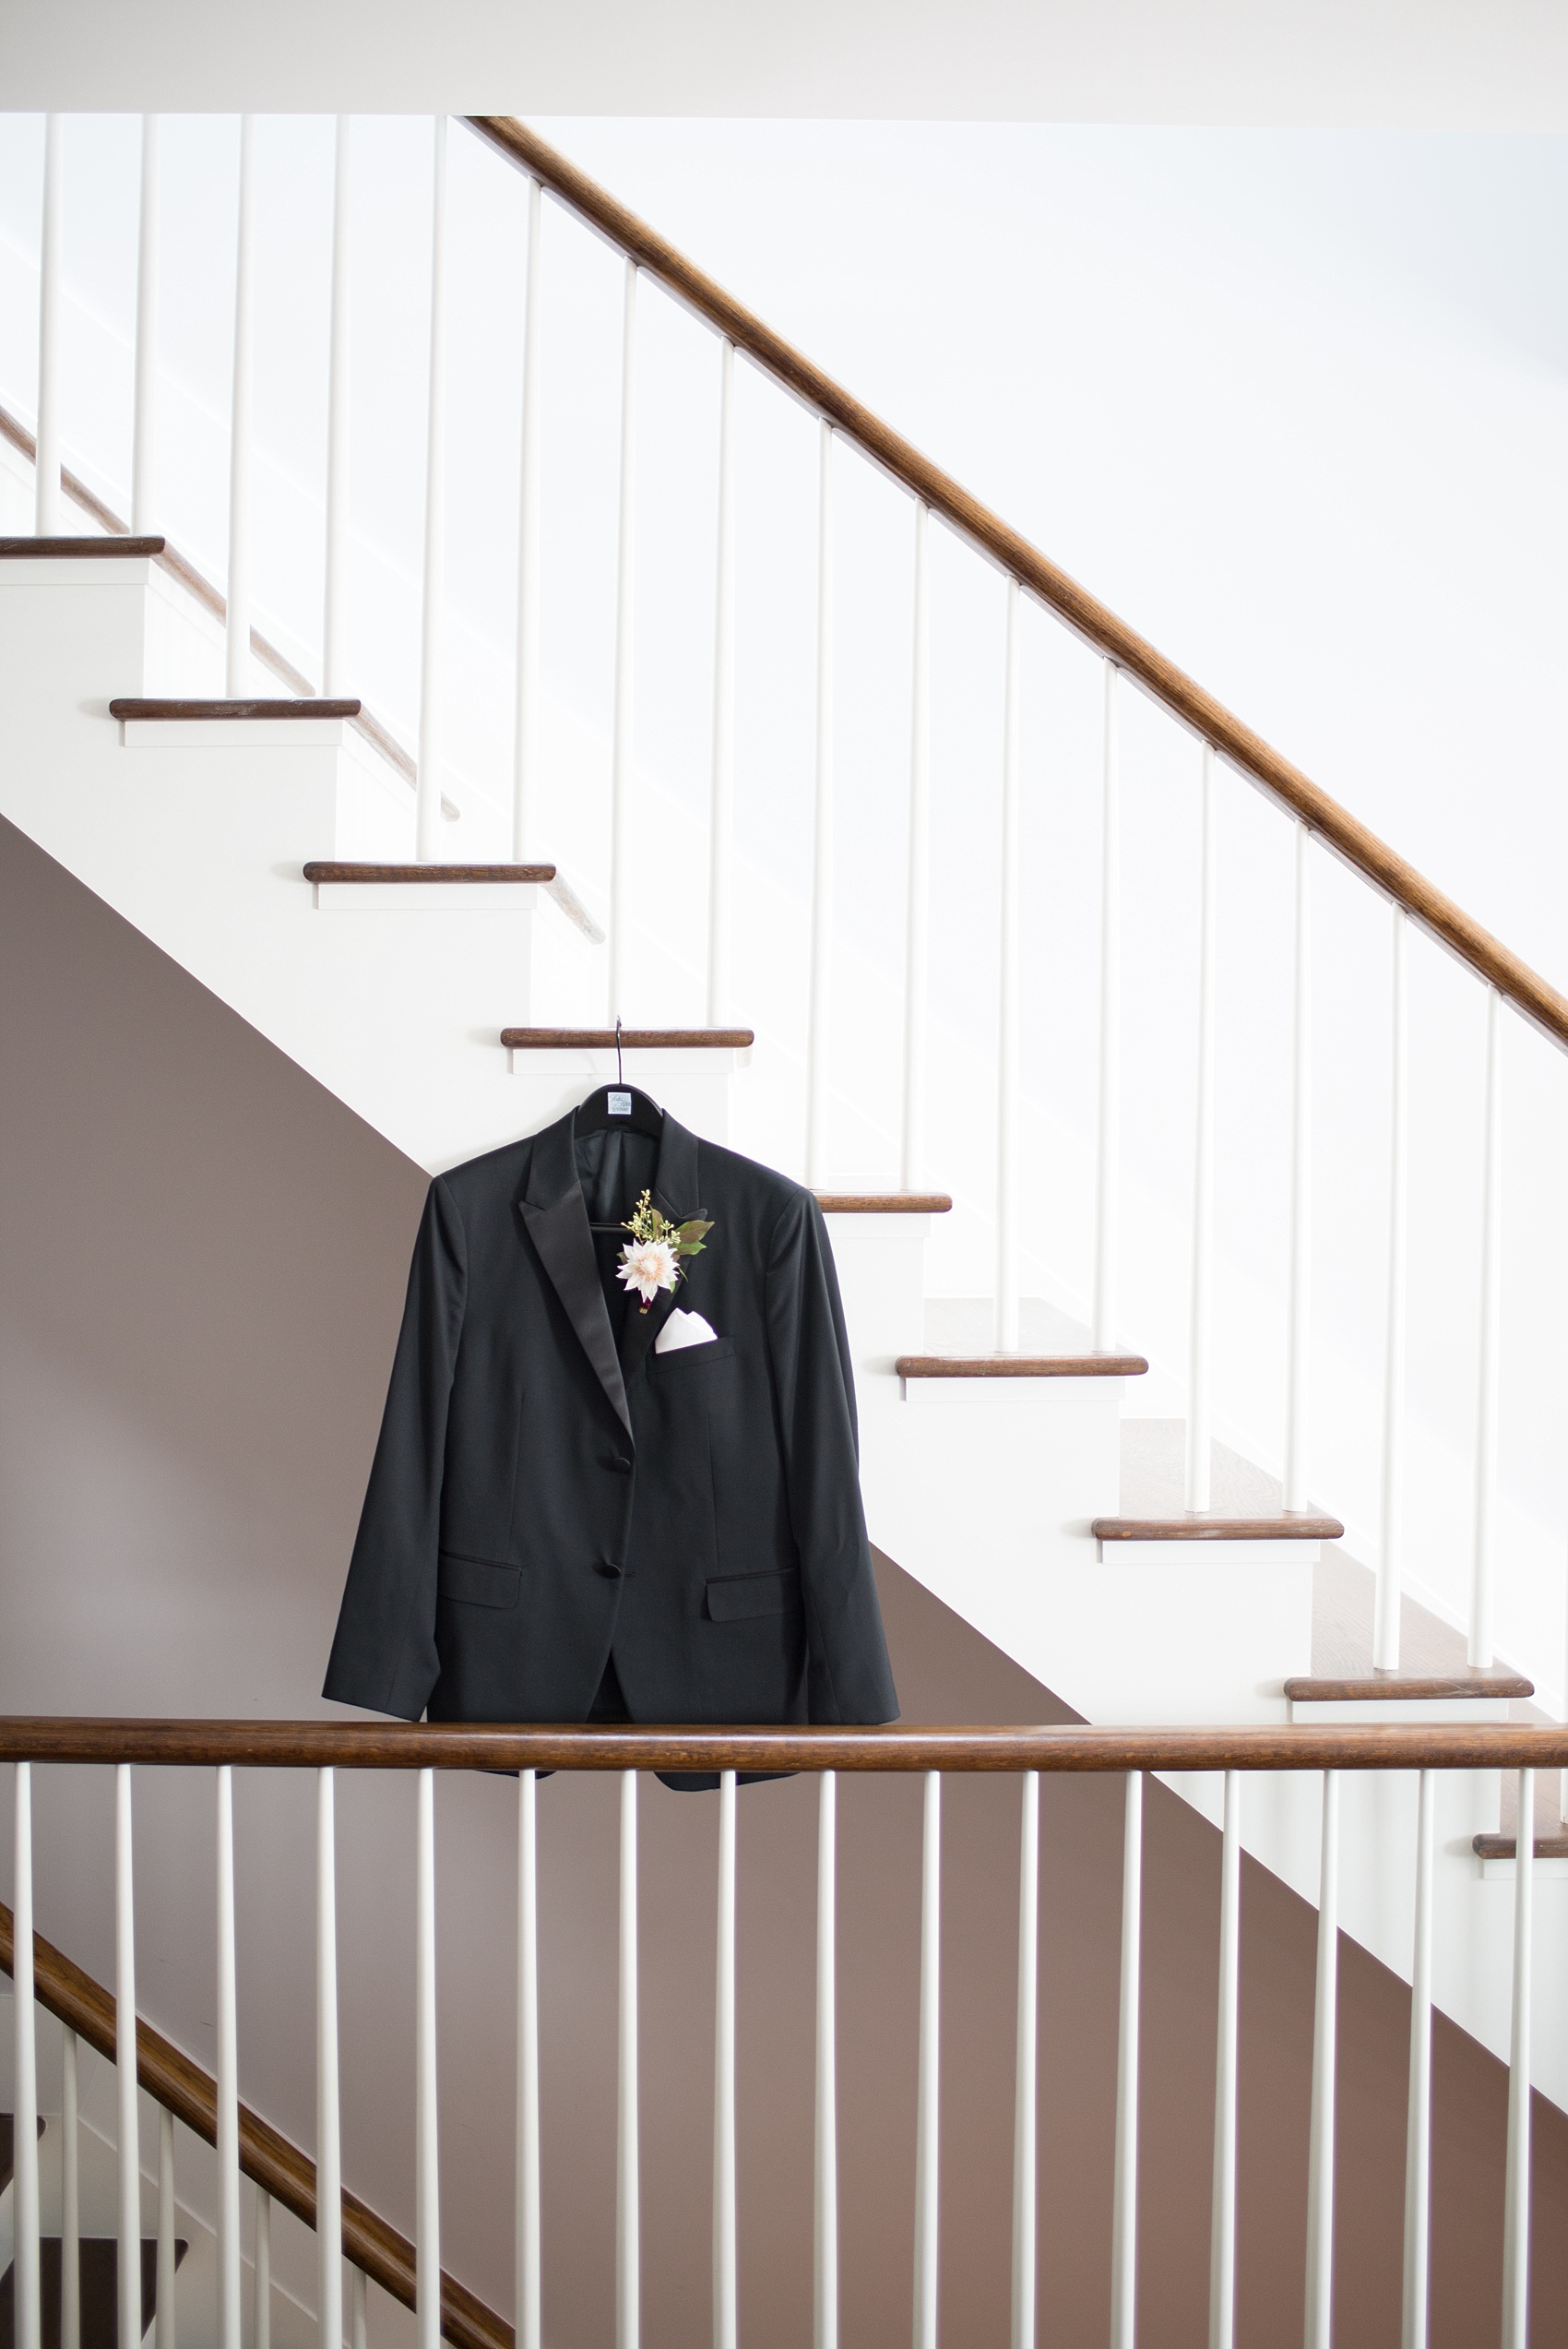 Mikkel Paige Photography photos of a wedding at Prospect Park Boathouse in Brooklyn, NY. A photo of the groom's black jacket on the staircase of a mod Air BnB in NYC.